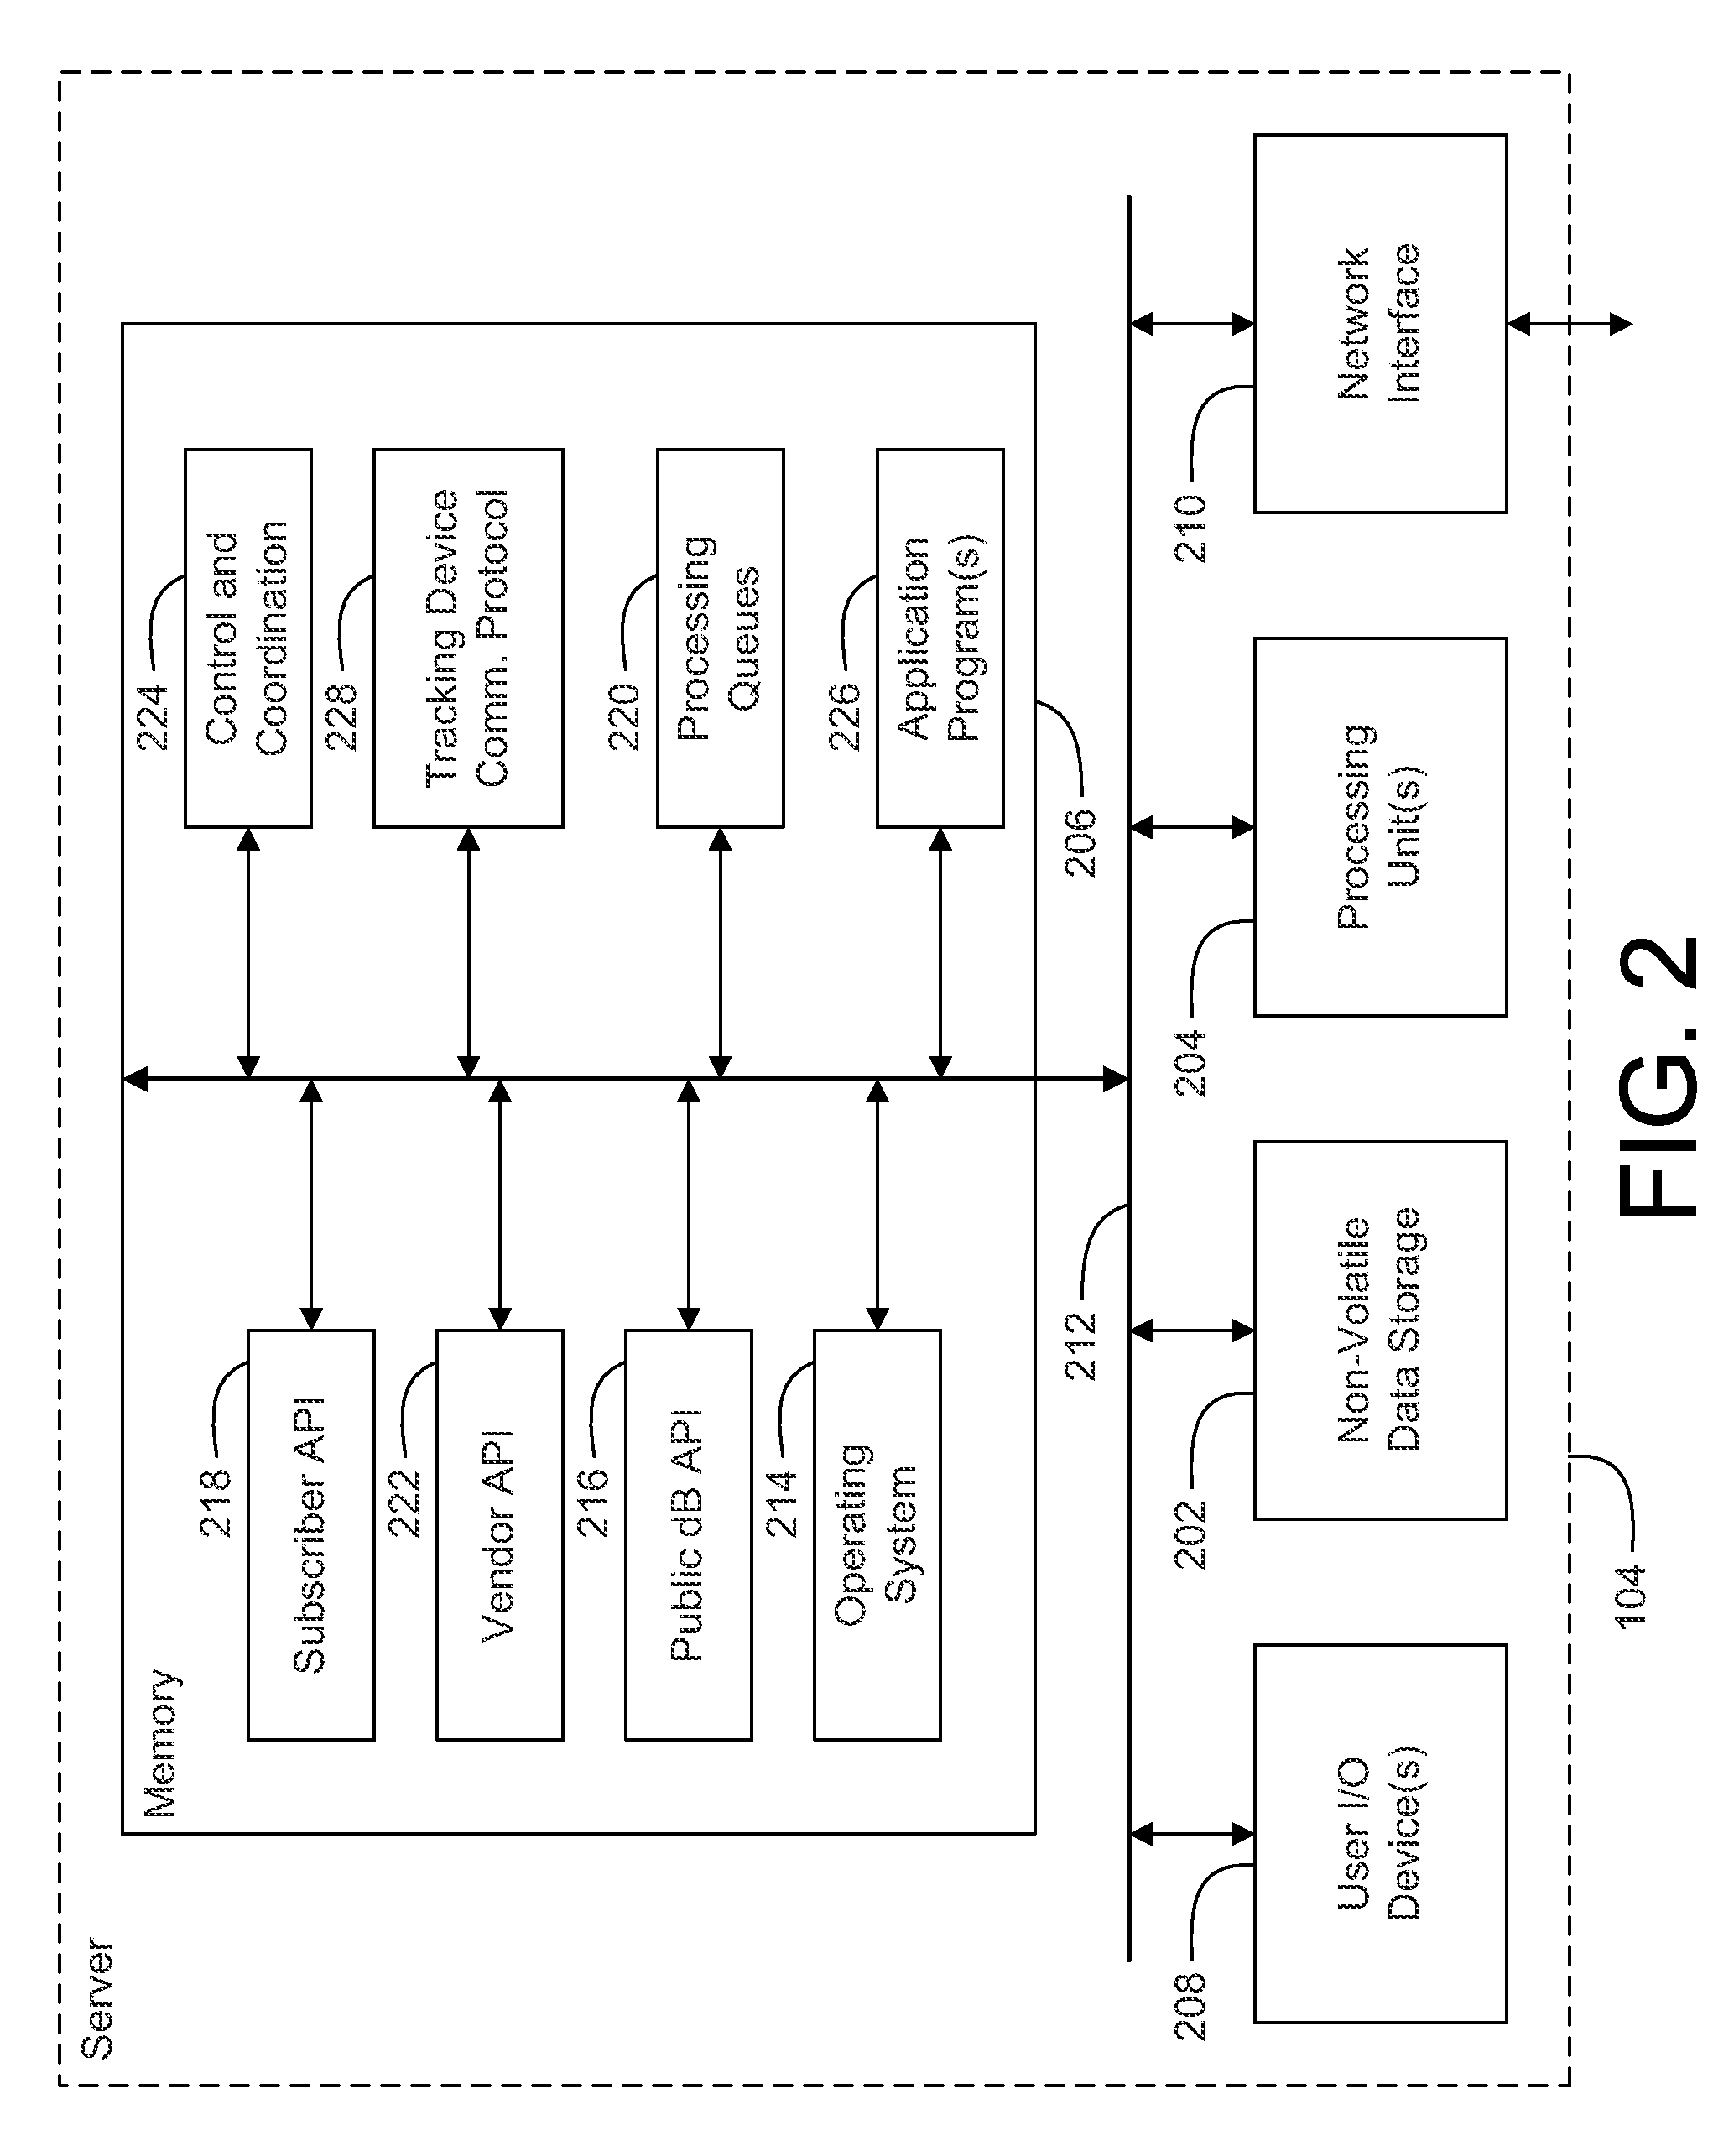 System and method for communication with a tracking device